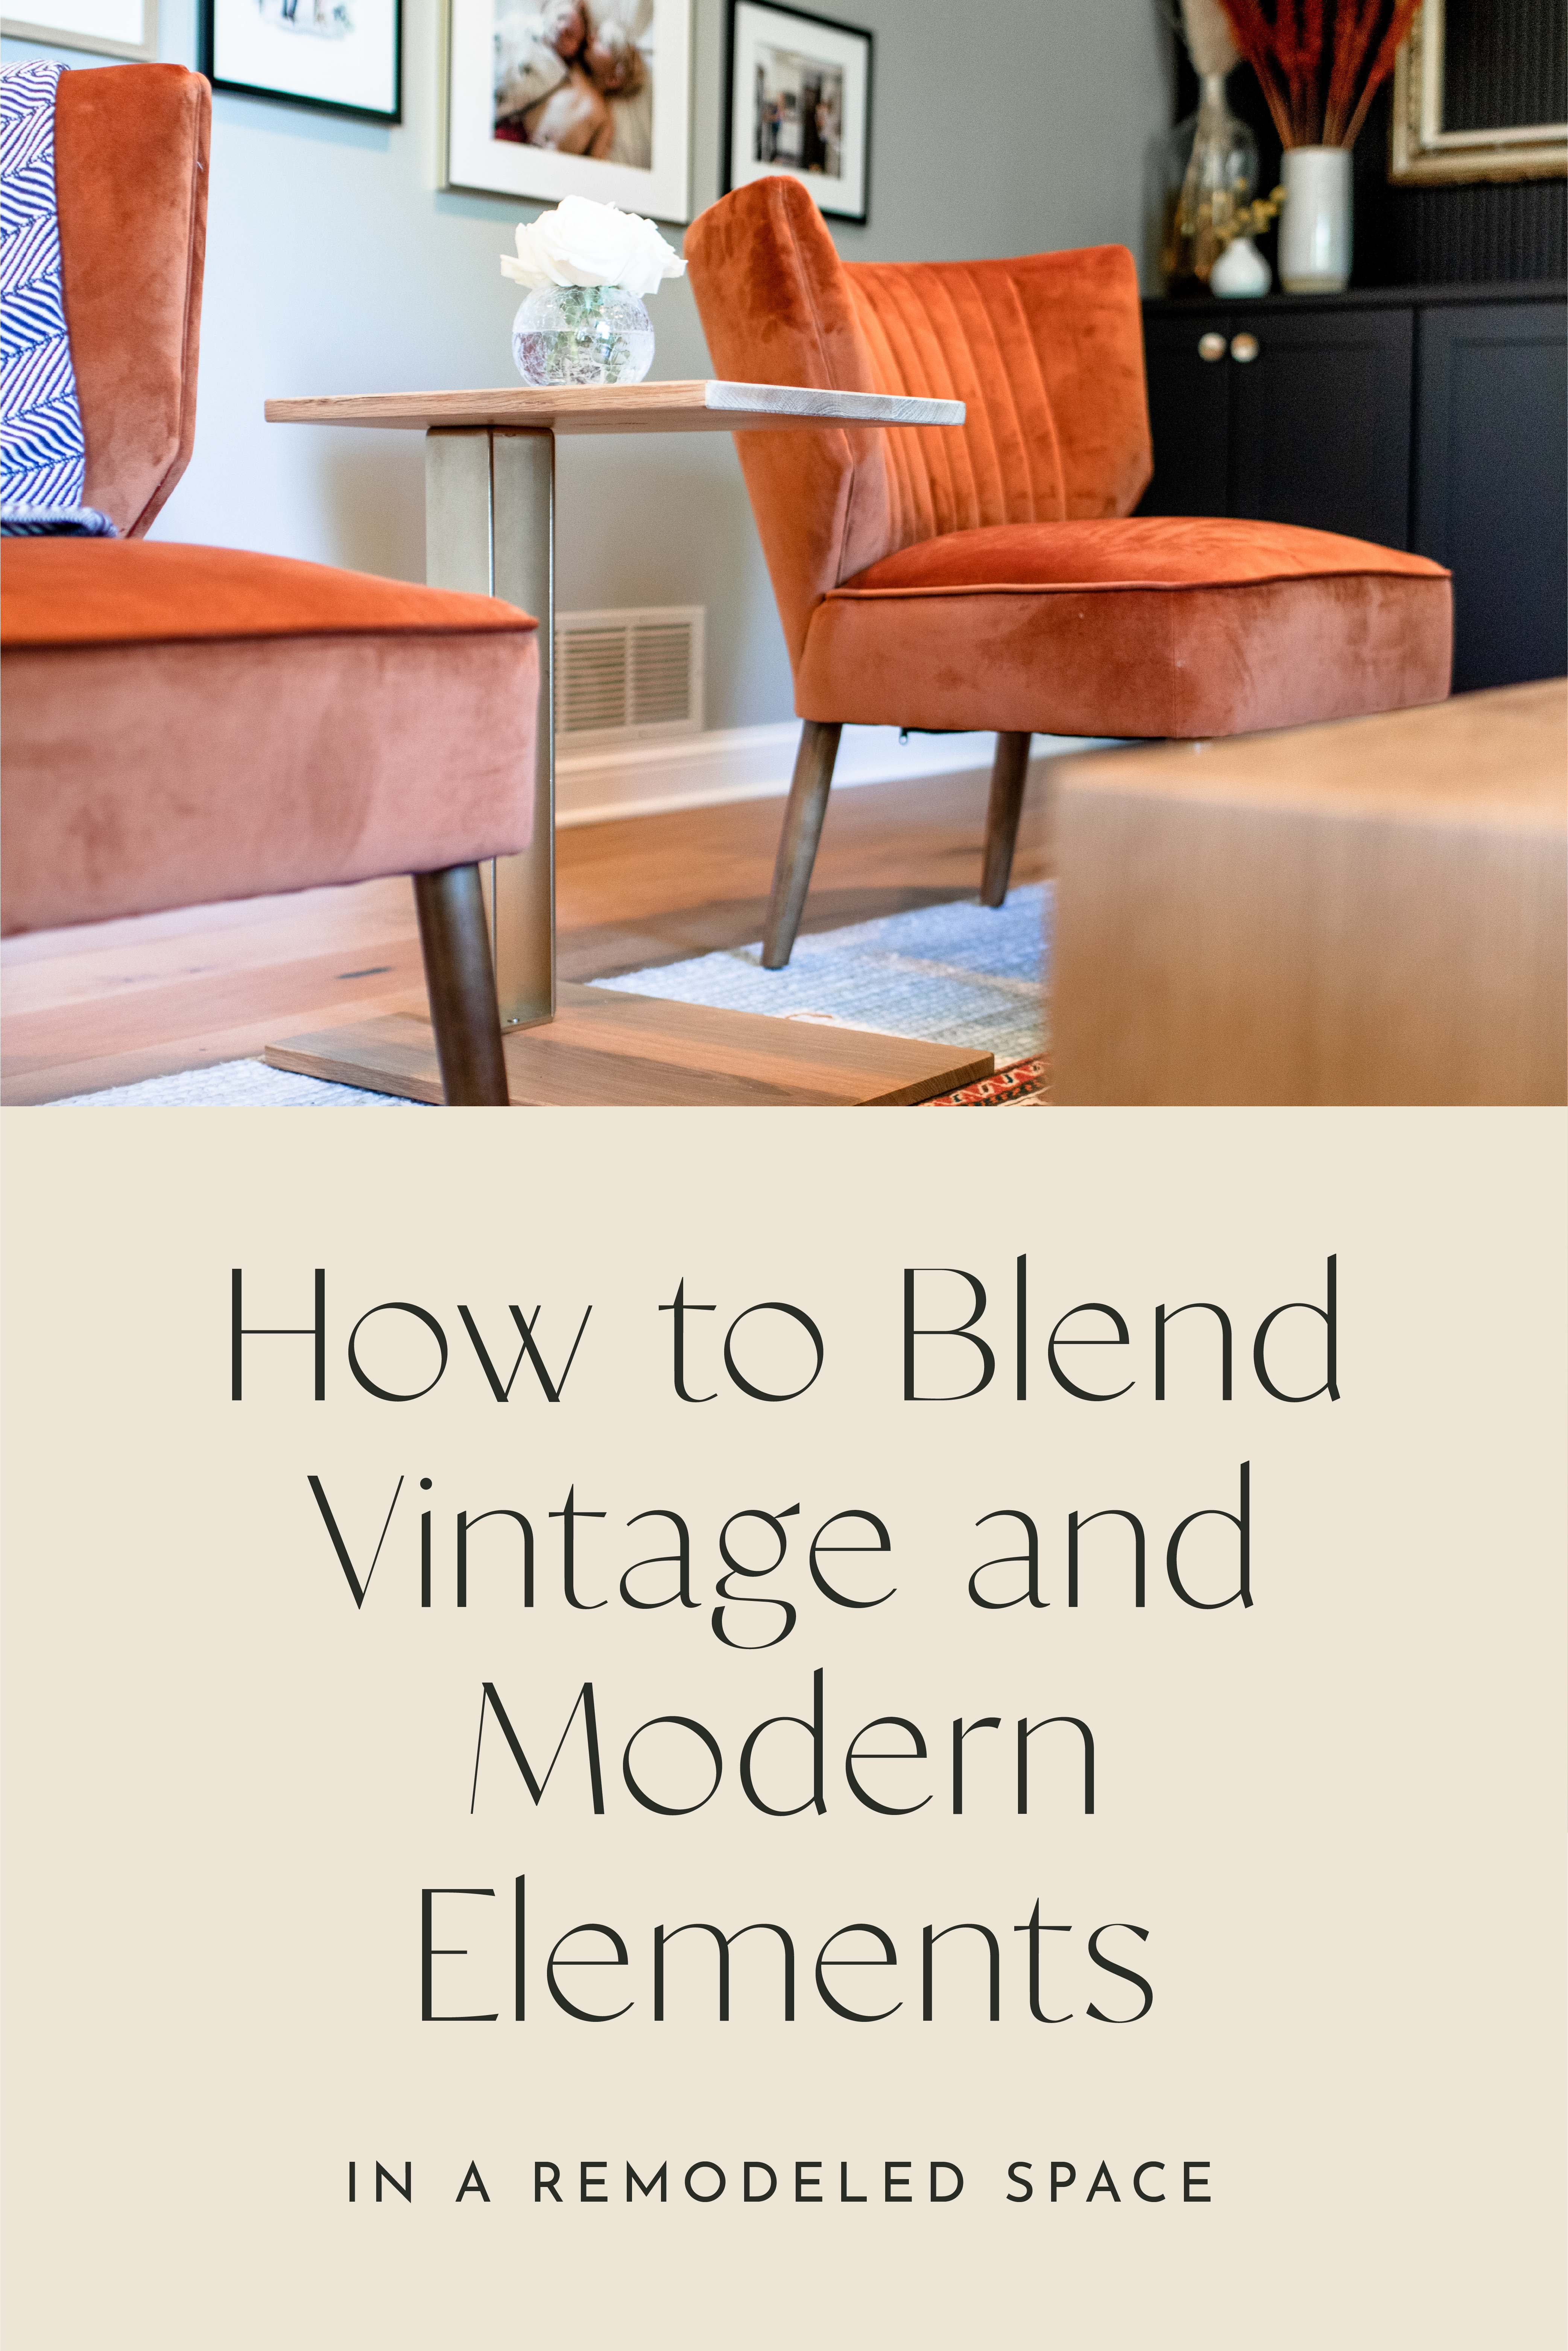 How to Blend Vintage and Modern Elements in a Remodeled Space 1